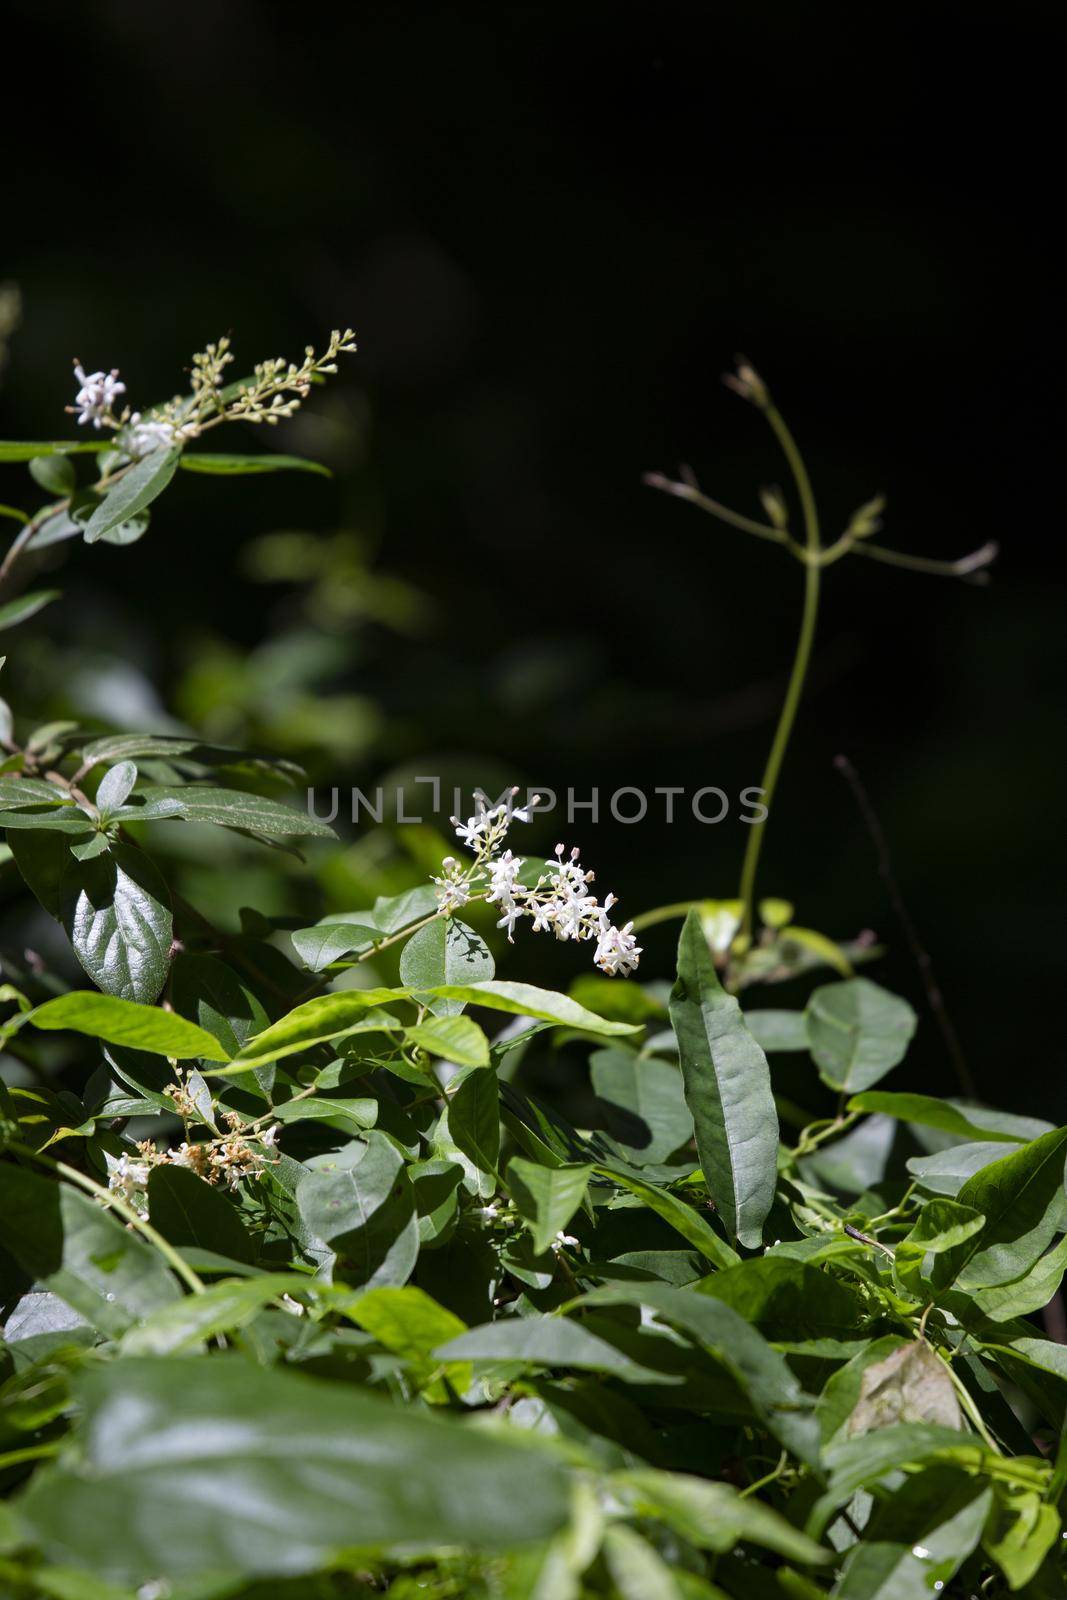 Tiny white blooms flowering on a green plant